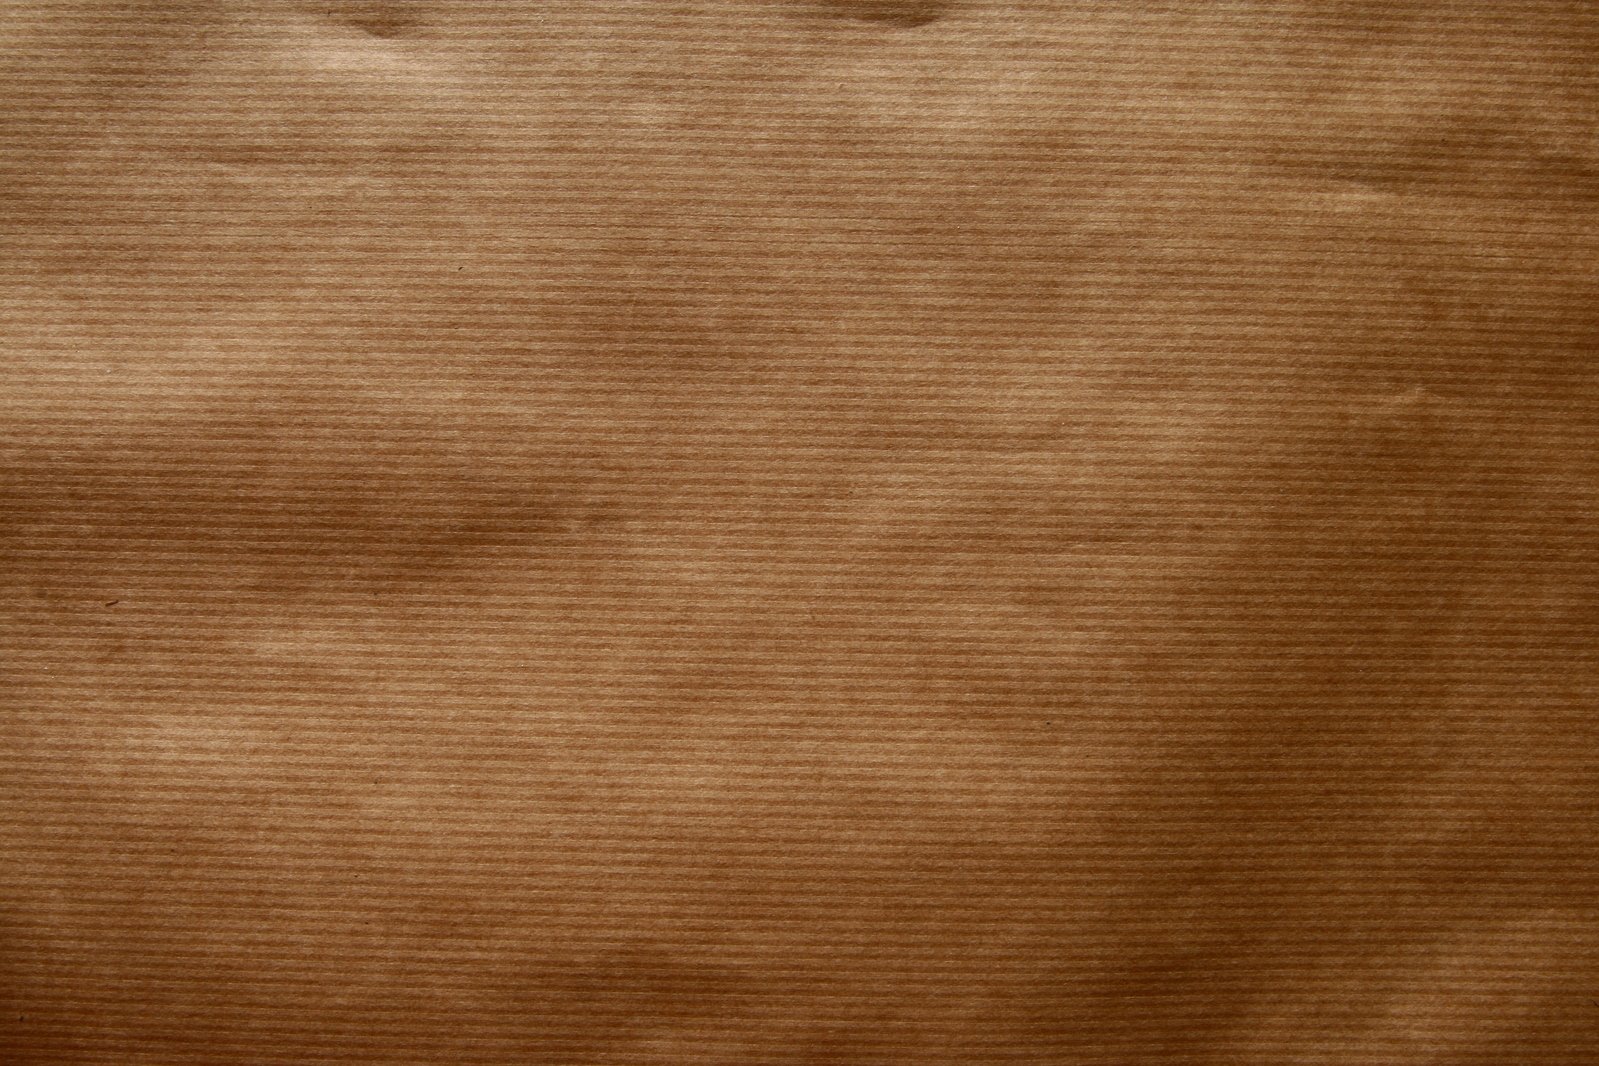 brown paper texture as background or wallpaper